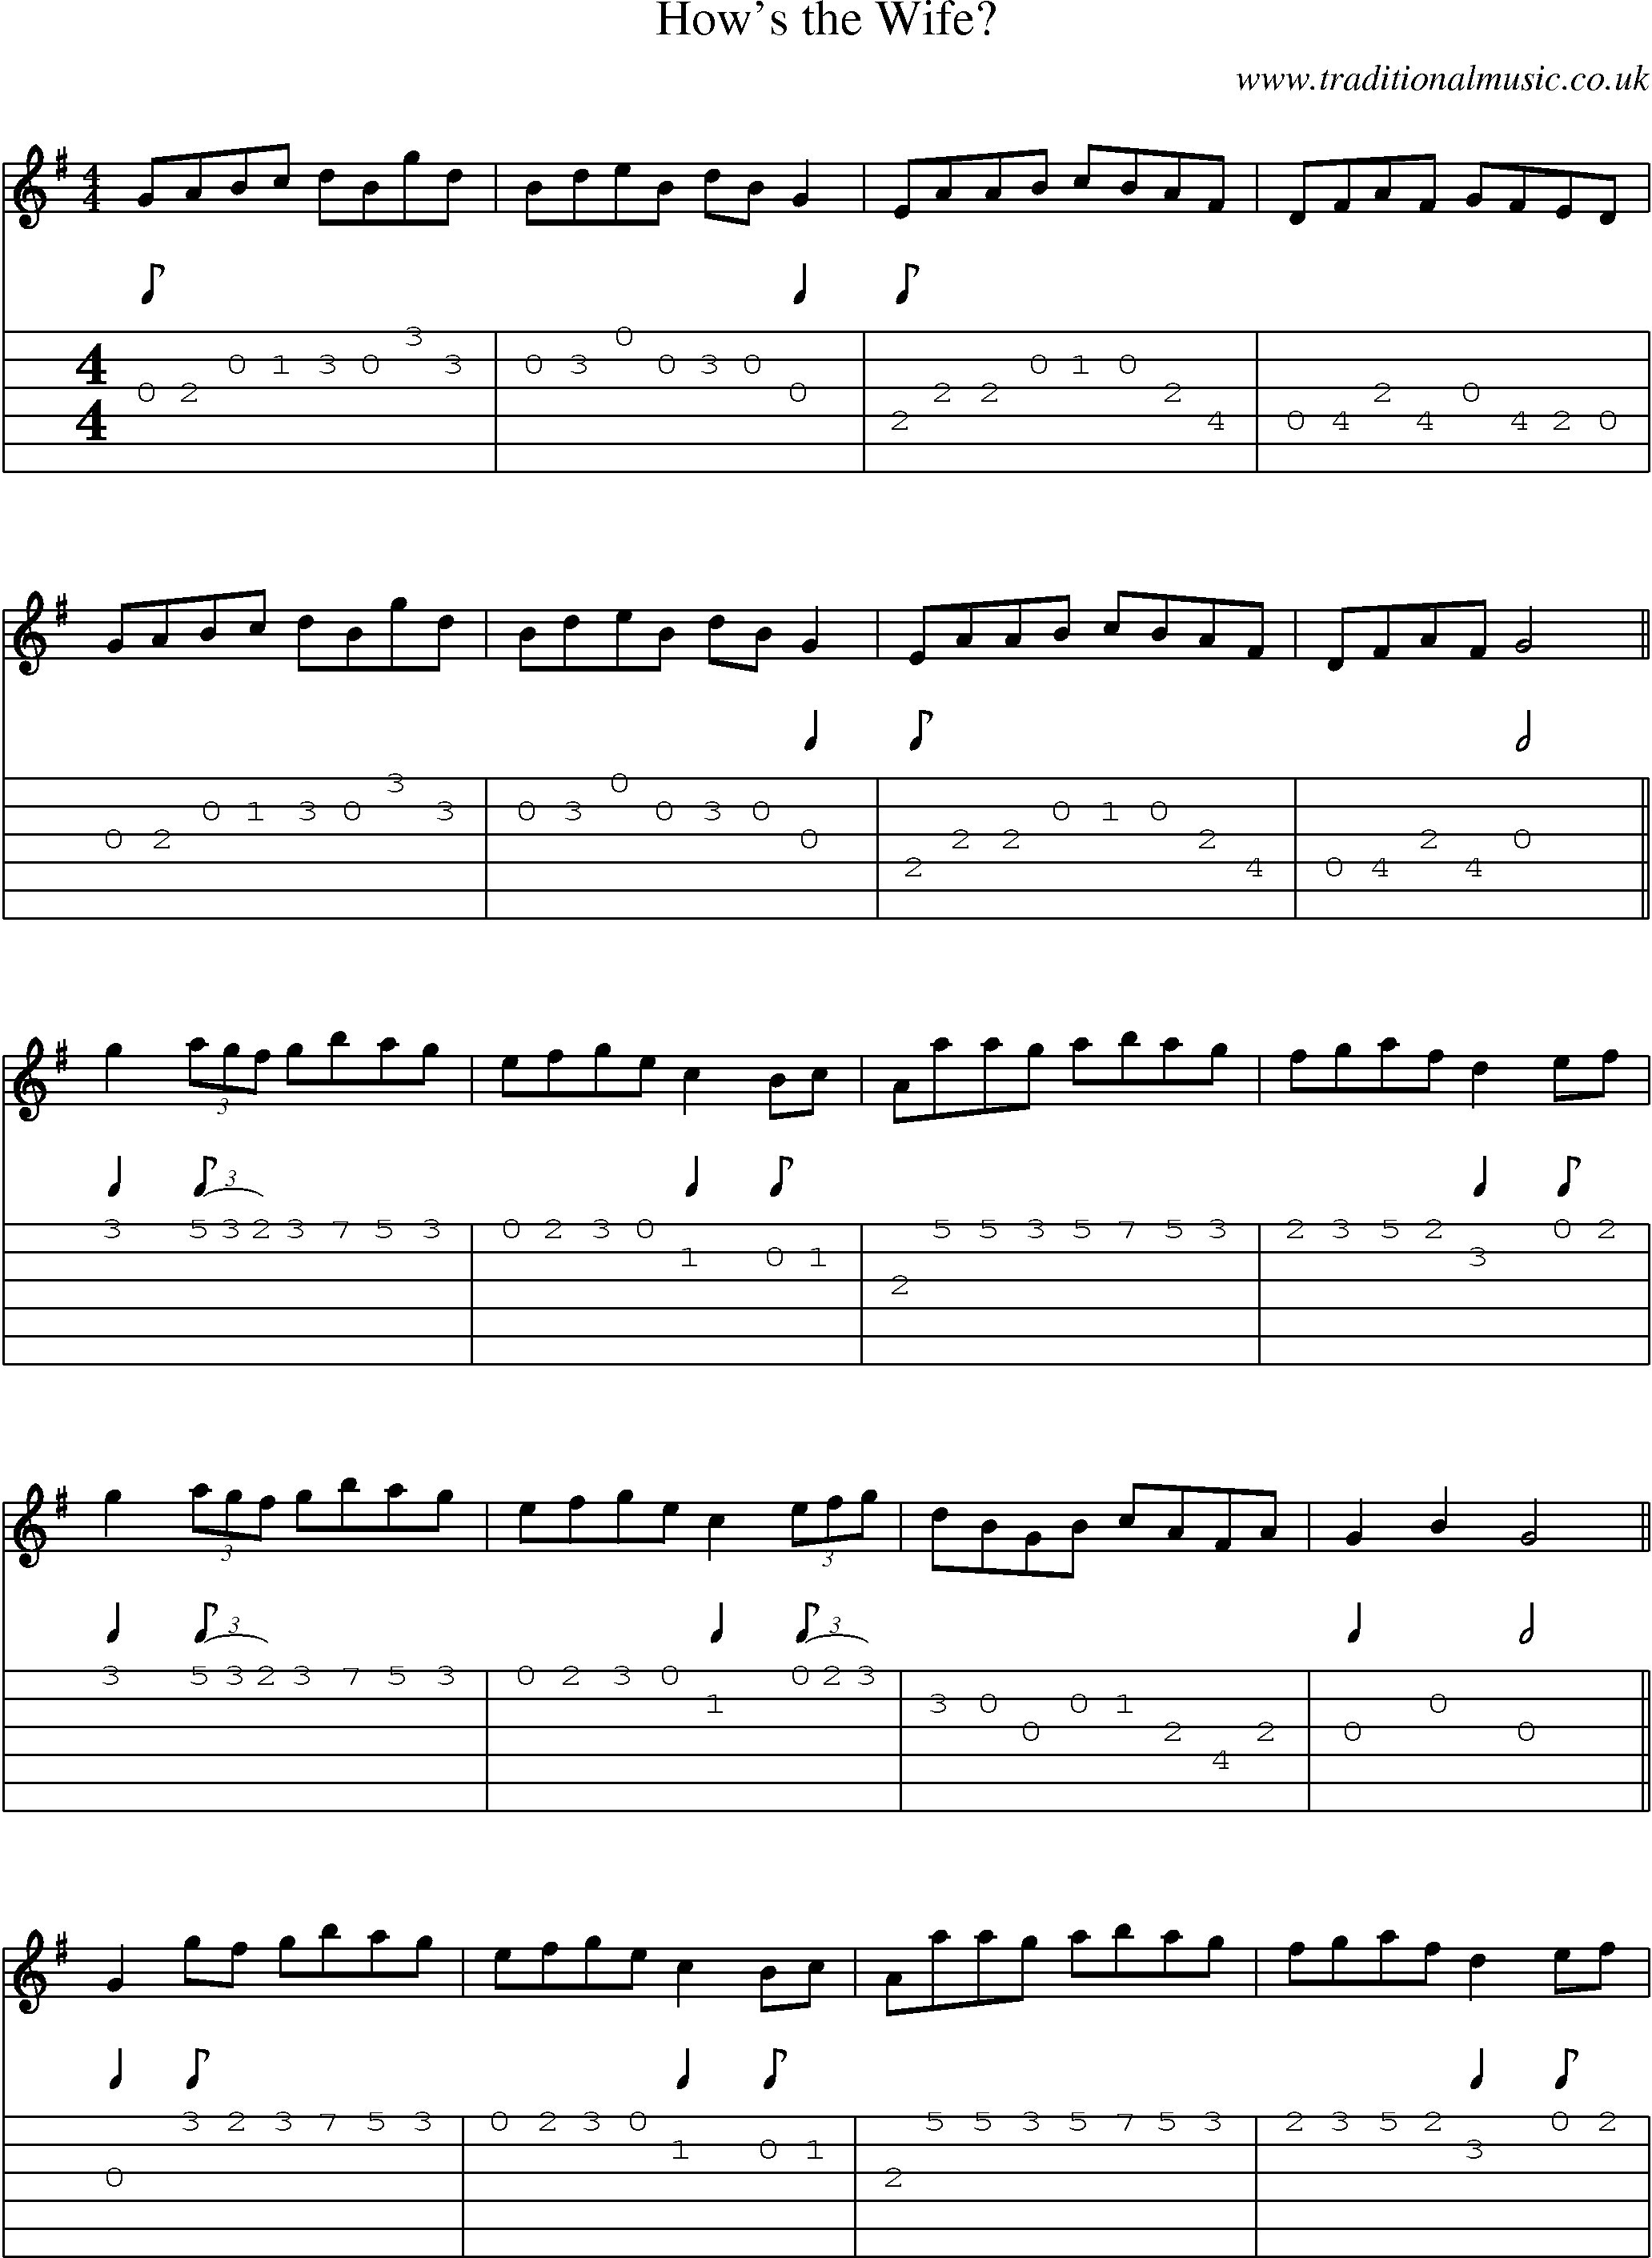 Music Score and Guitar Tabs for Hows Wife